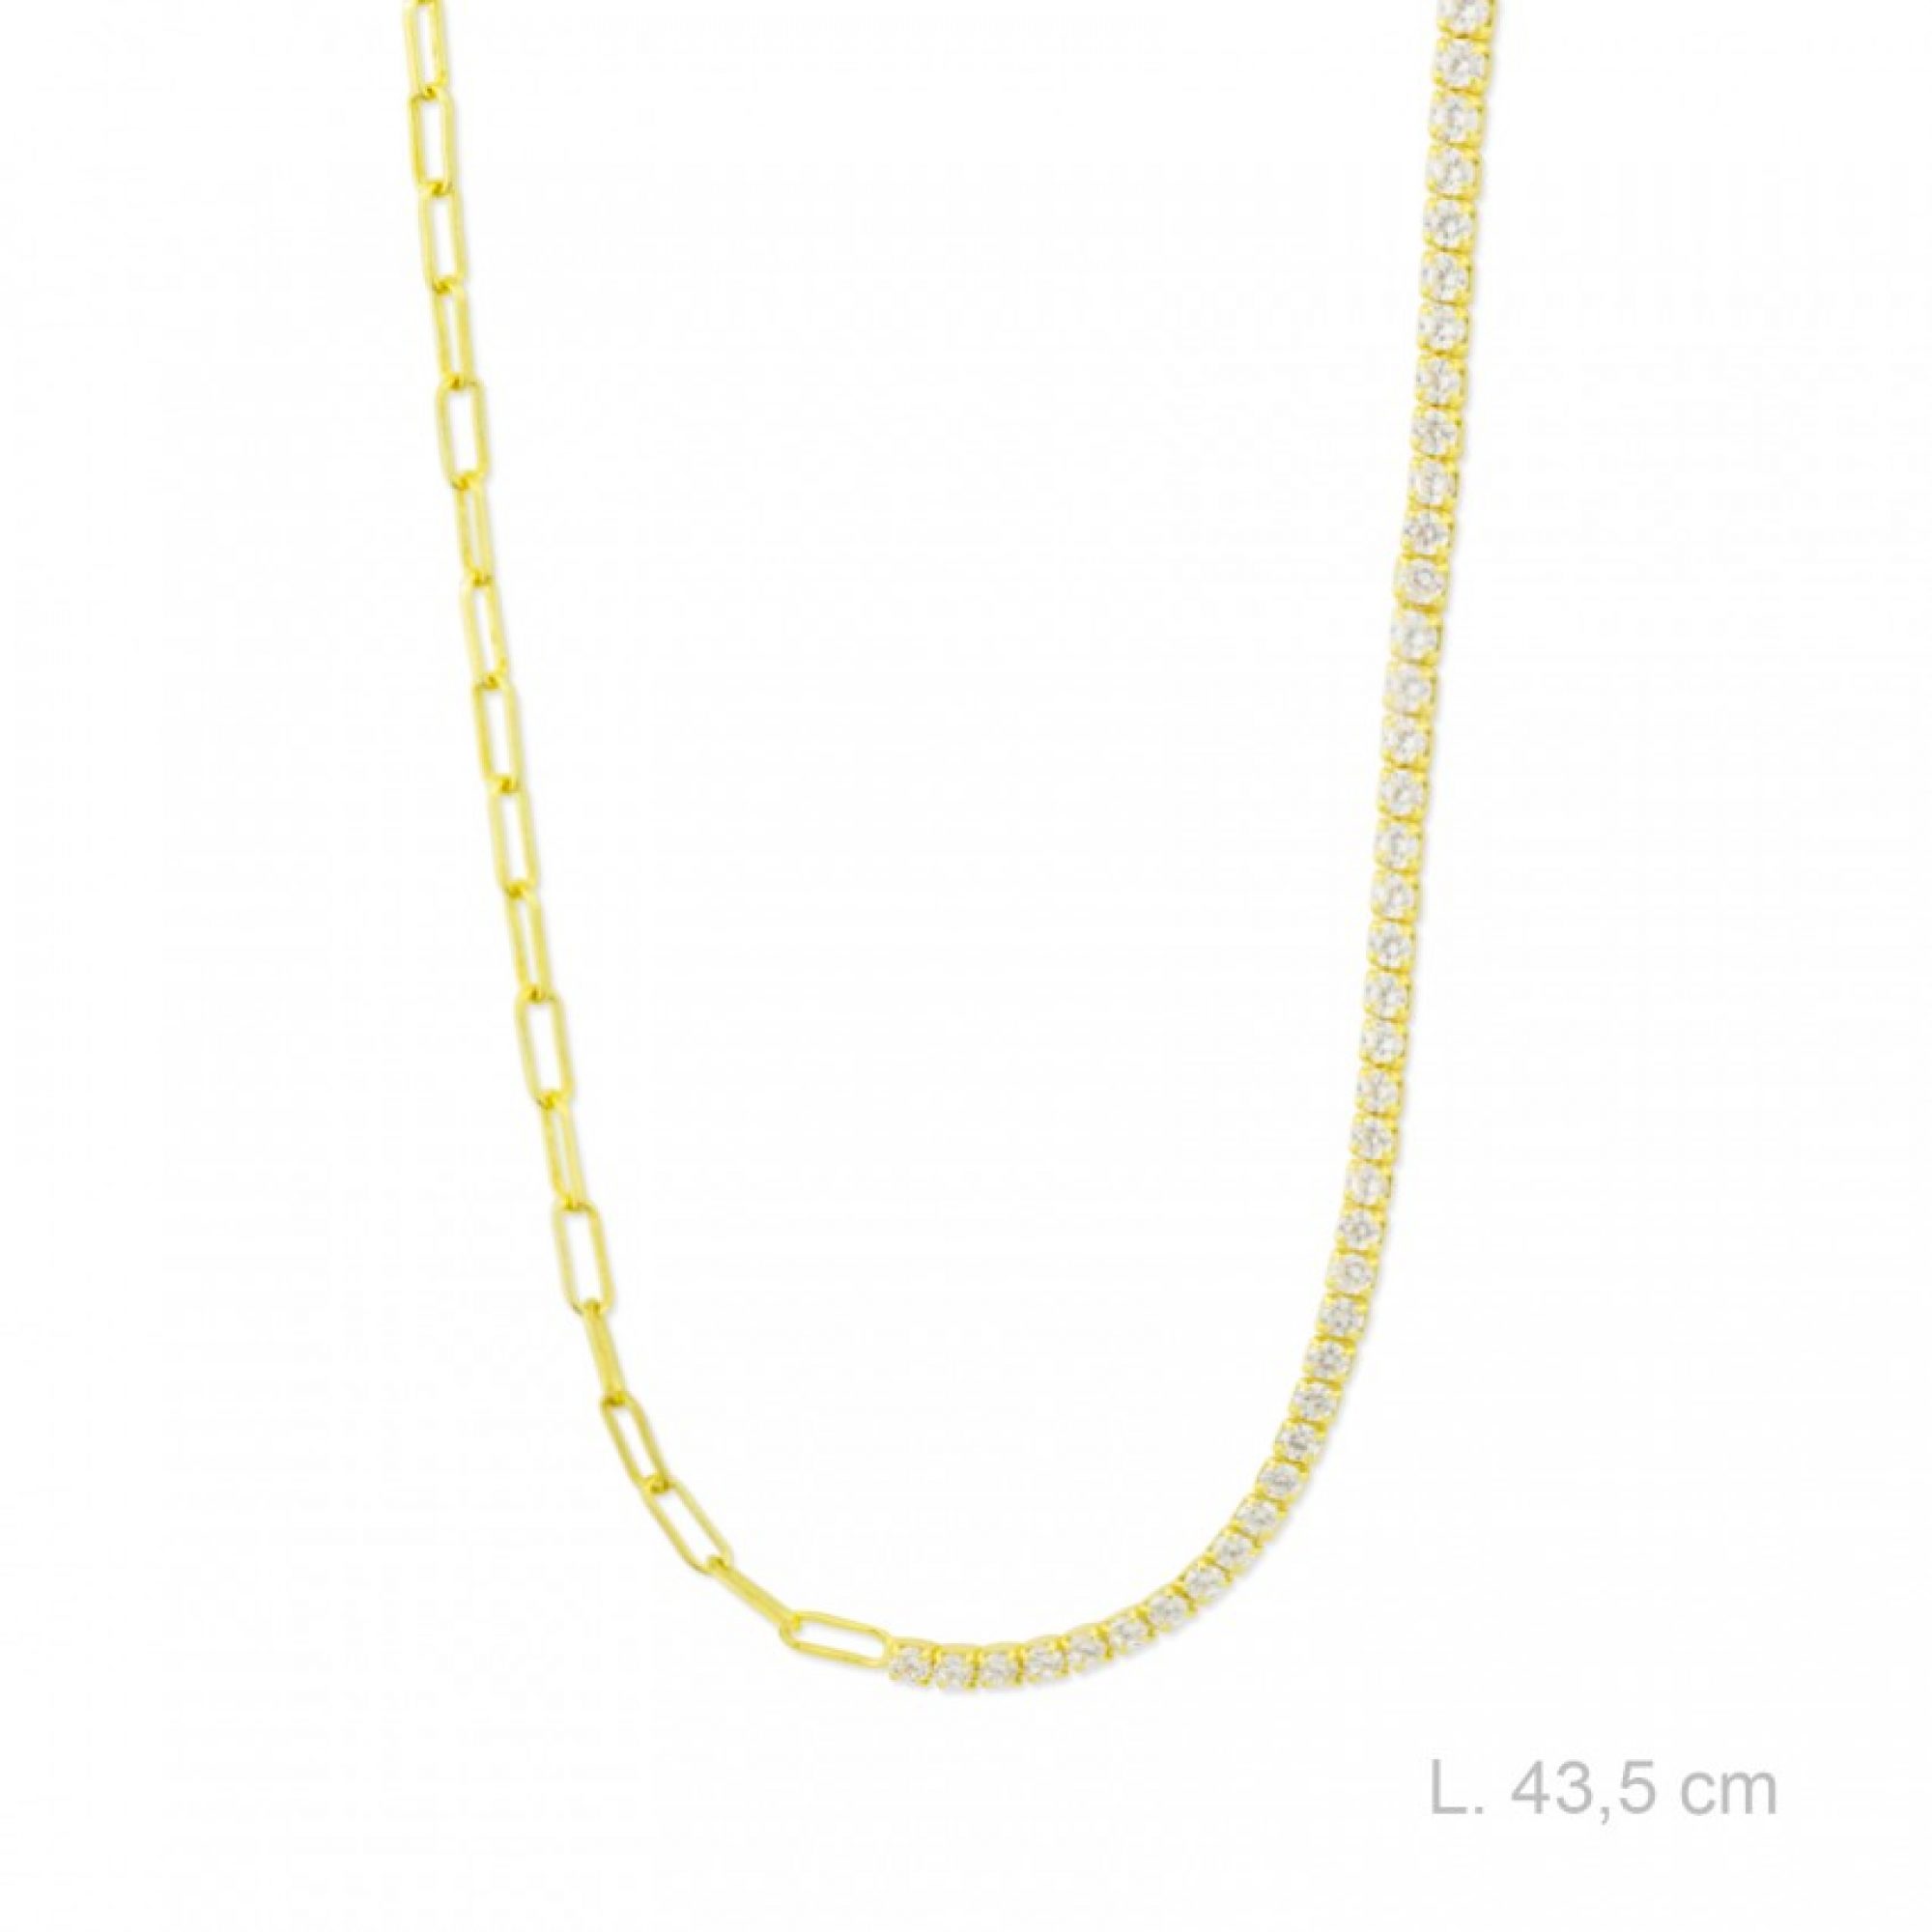 Gold plated necklace with zircon stones